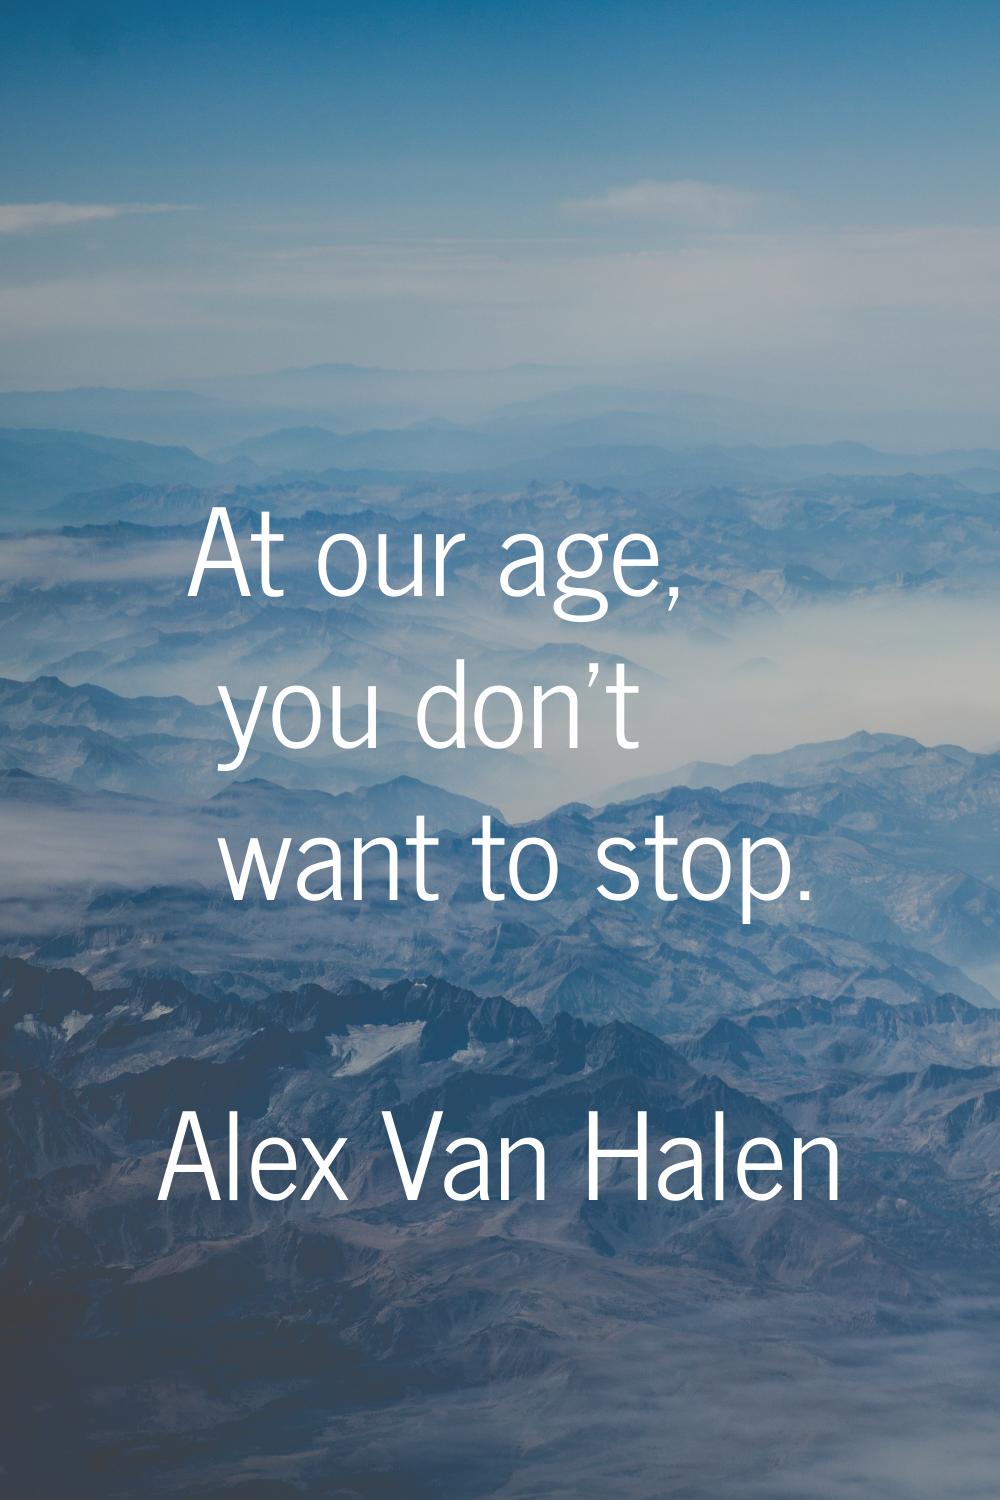 At our age, you don't want to stop.